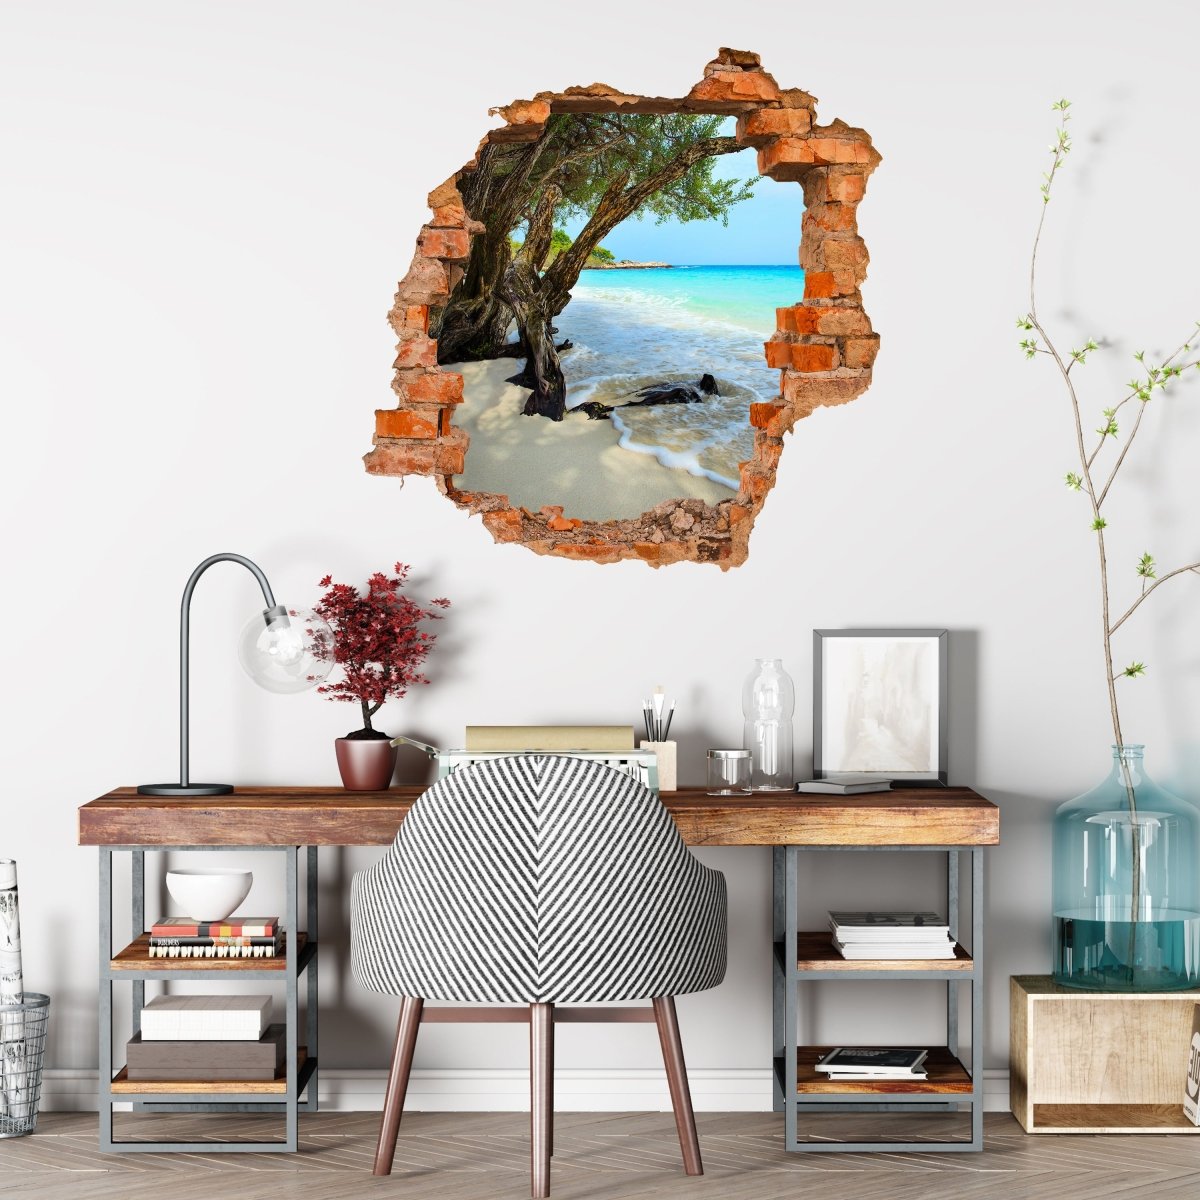 3D Wall Sticker Calm and Peaceful Beach. Rayong Province - Wall Decal M0899